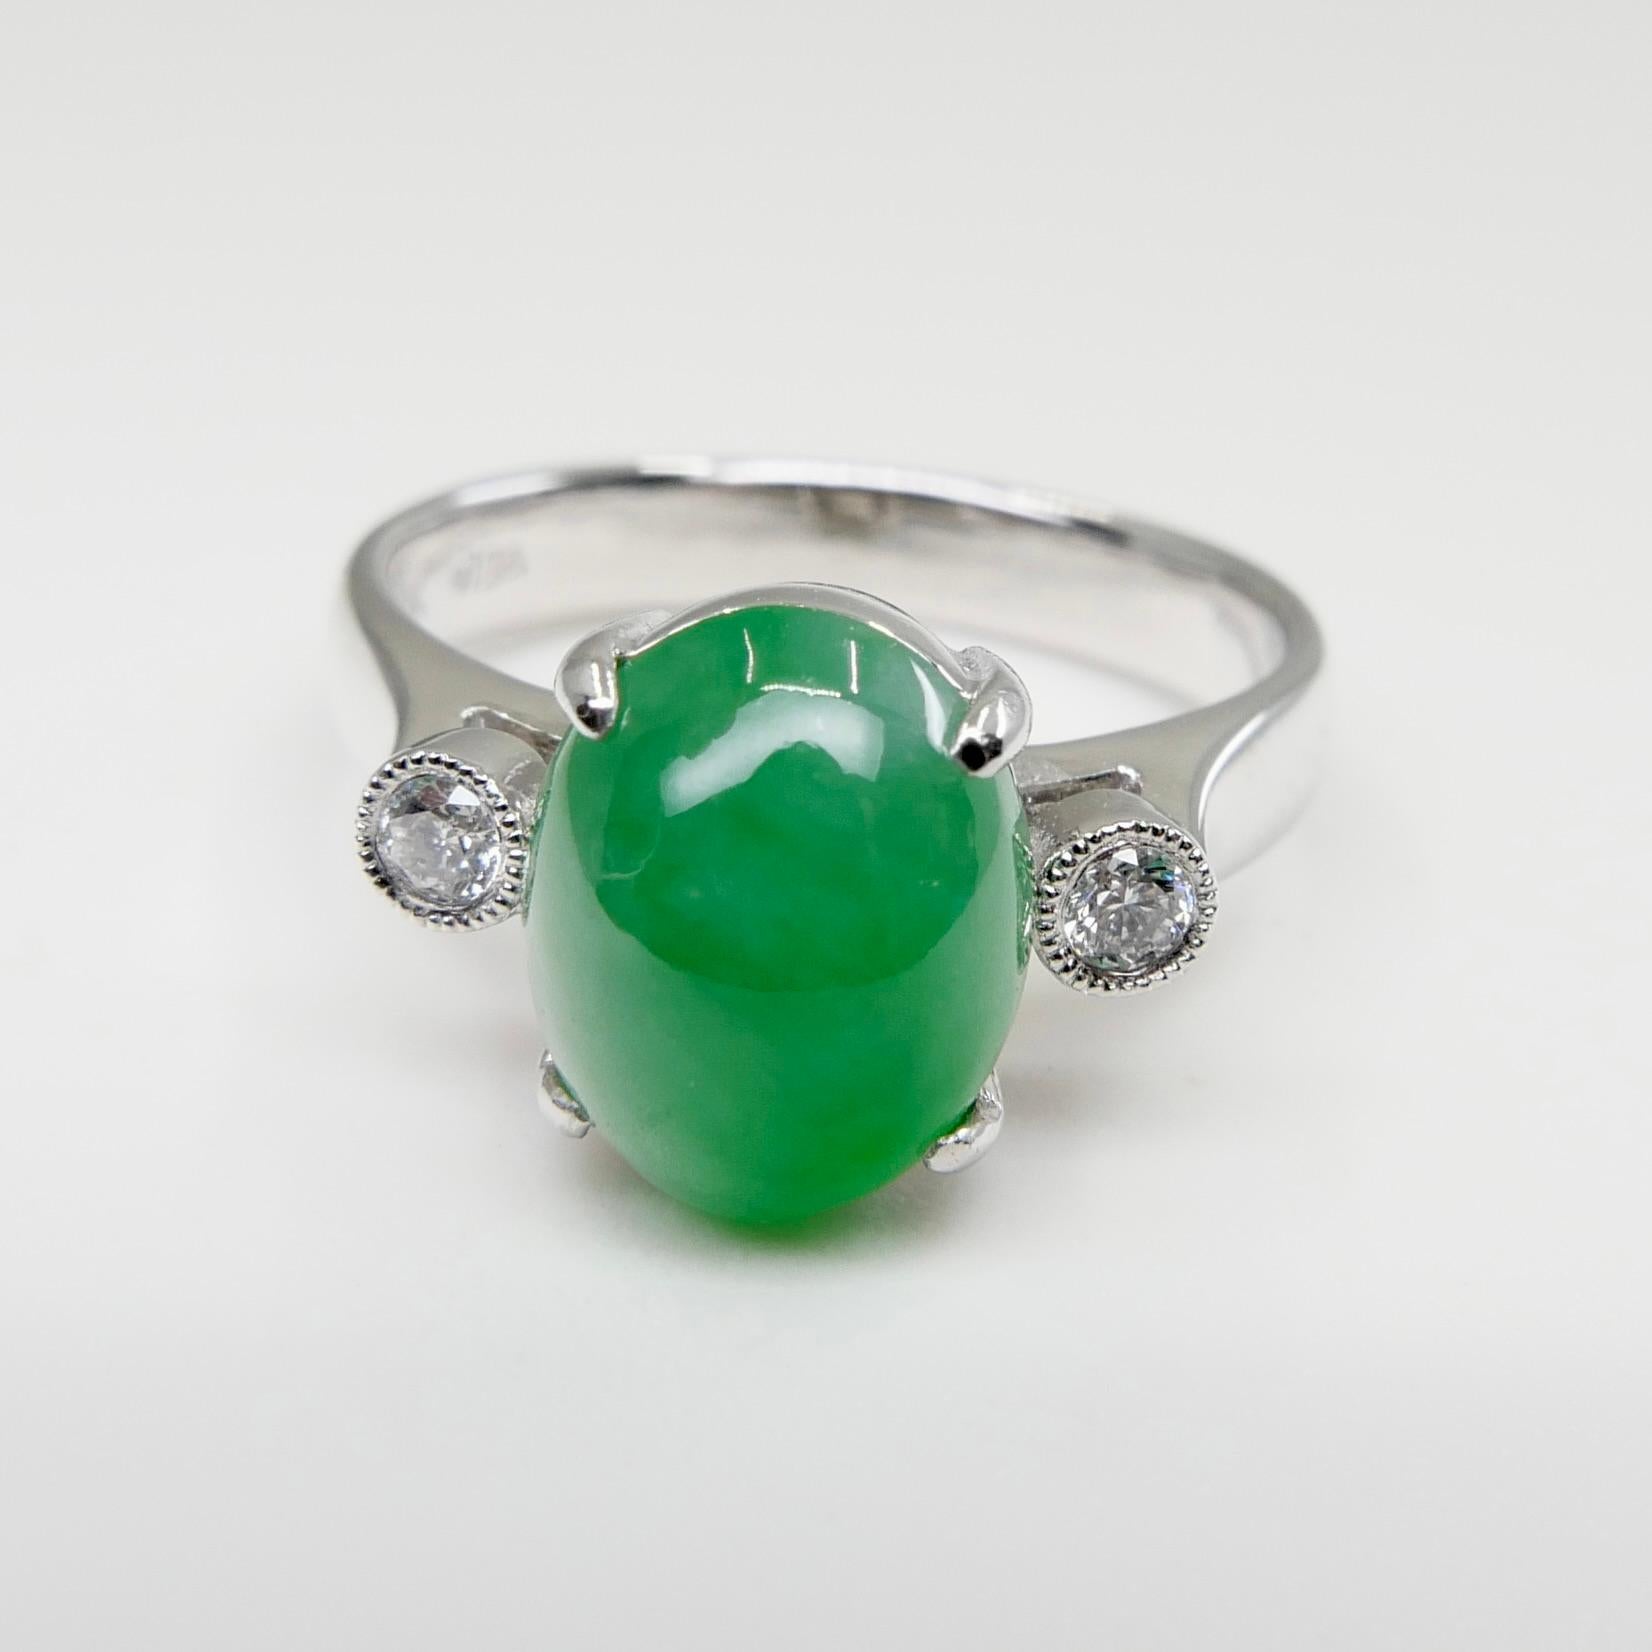 Women's Certified Type a Jade & Oval Diamond 3 Stone Ring, Glowing Apple Green Color For Sale